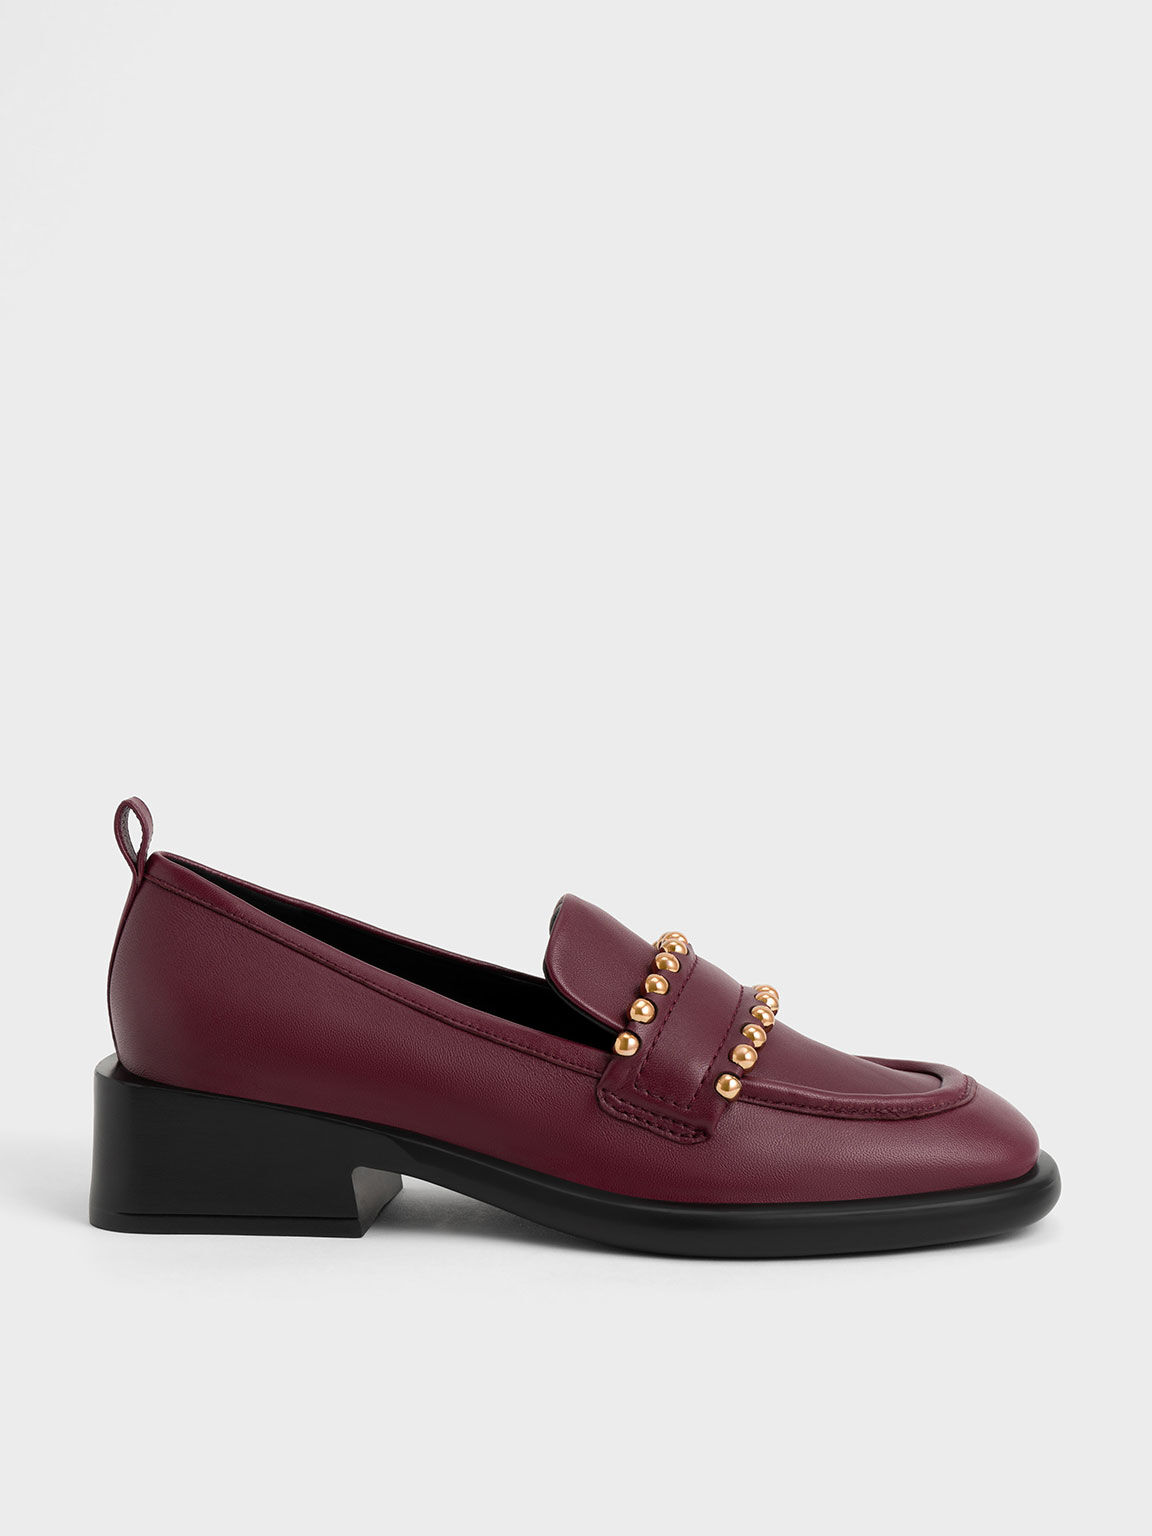 Prune Studded Leather Penny Loafers - CHARLES & KEITH UK